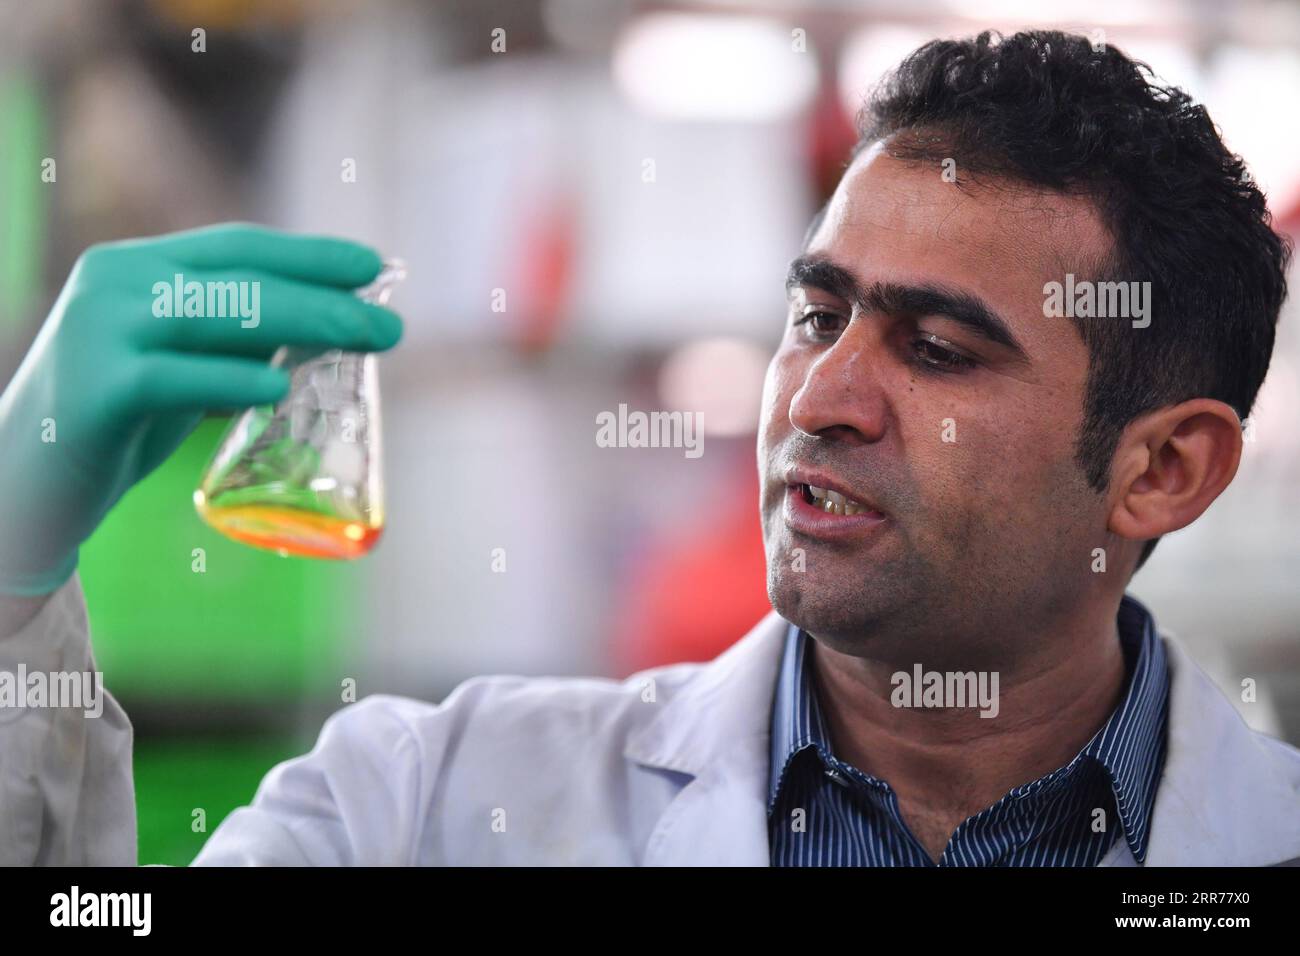 210318 -- XI AN, March 18, 2021 -- Abdul Ghaffar Shar conducts an experiment at a laboratory of Northwest Agriculture and Forestry University NWAFU in Yangling, northwest China s Shaanxi Province, March 17, 2021. Abdul Ghaffar Shar, 30, is a Pakistani doctoral student in China s Northwest Agriculture and Forestry University NWAFU. Shar is doing plant nutrition research for his doctoral degree. After receiving his bachelor s degree in agriculture from Sindh Agriculture University in Pakistan in 2014, Shar decided to further his studies in China s NWAFU. Shar has learned to speak Mandarin and us Stock Photo